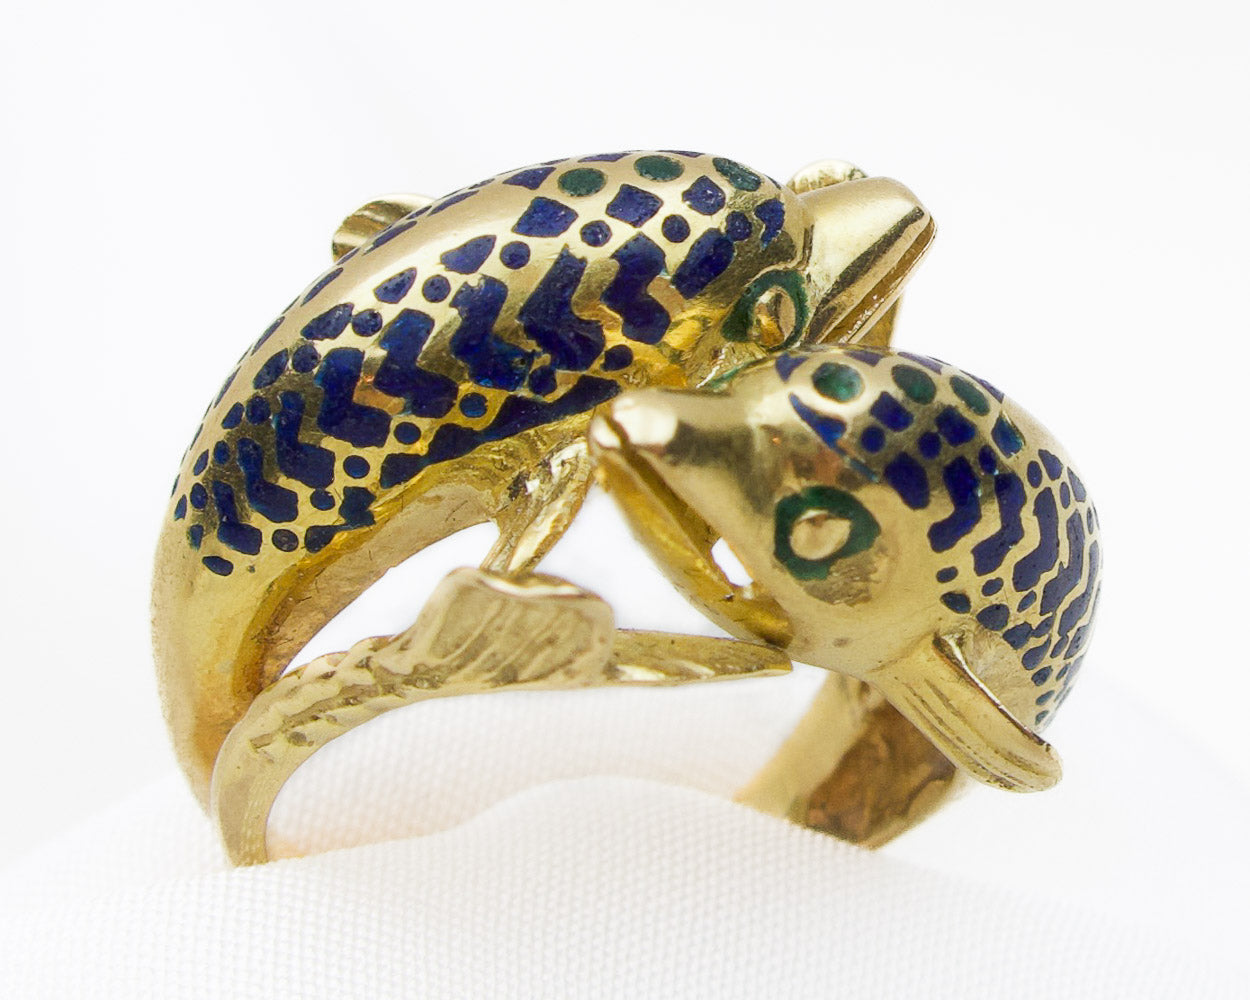 Charming Dolphin Gold Ring for Kids